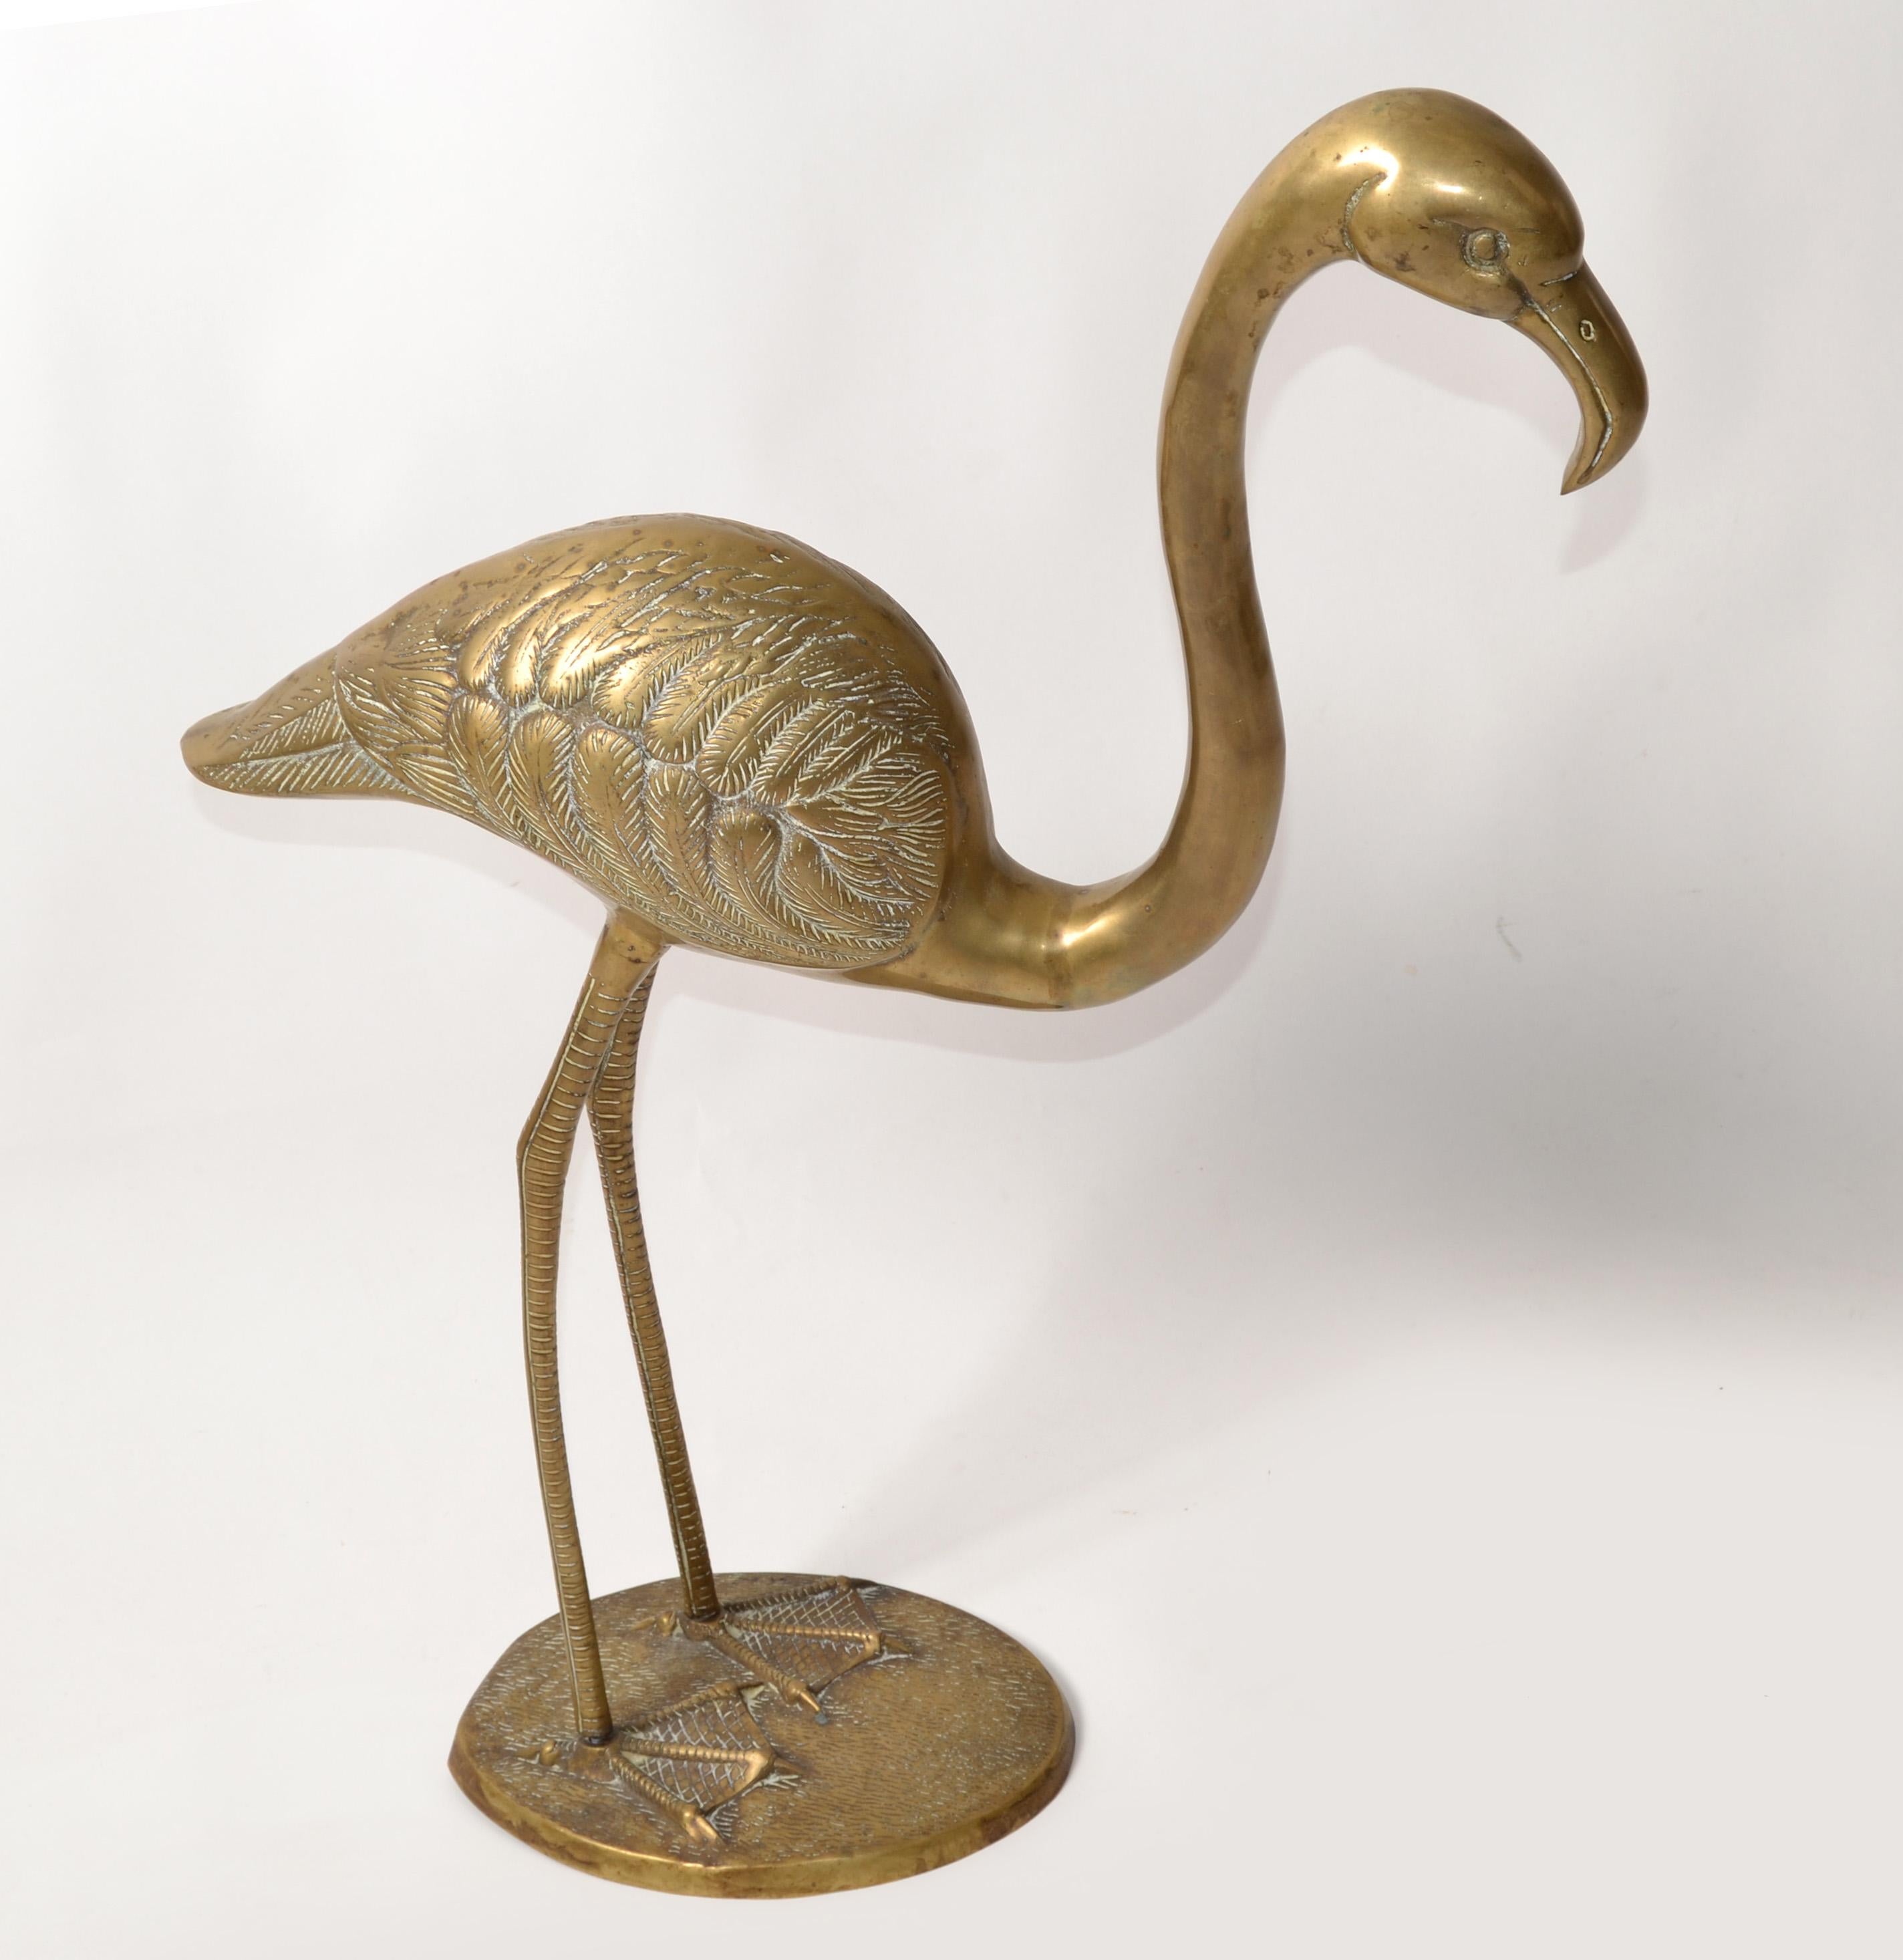 Large Mid-Century Modern hand-carved Brass Flamingo, Animal Sculpture with stylized legs & feet. 
Features long legs and body of the Flamingo which are attached with small screws to the Base.
Made in the USA in the late 1960s.
A beautiful Arts and